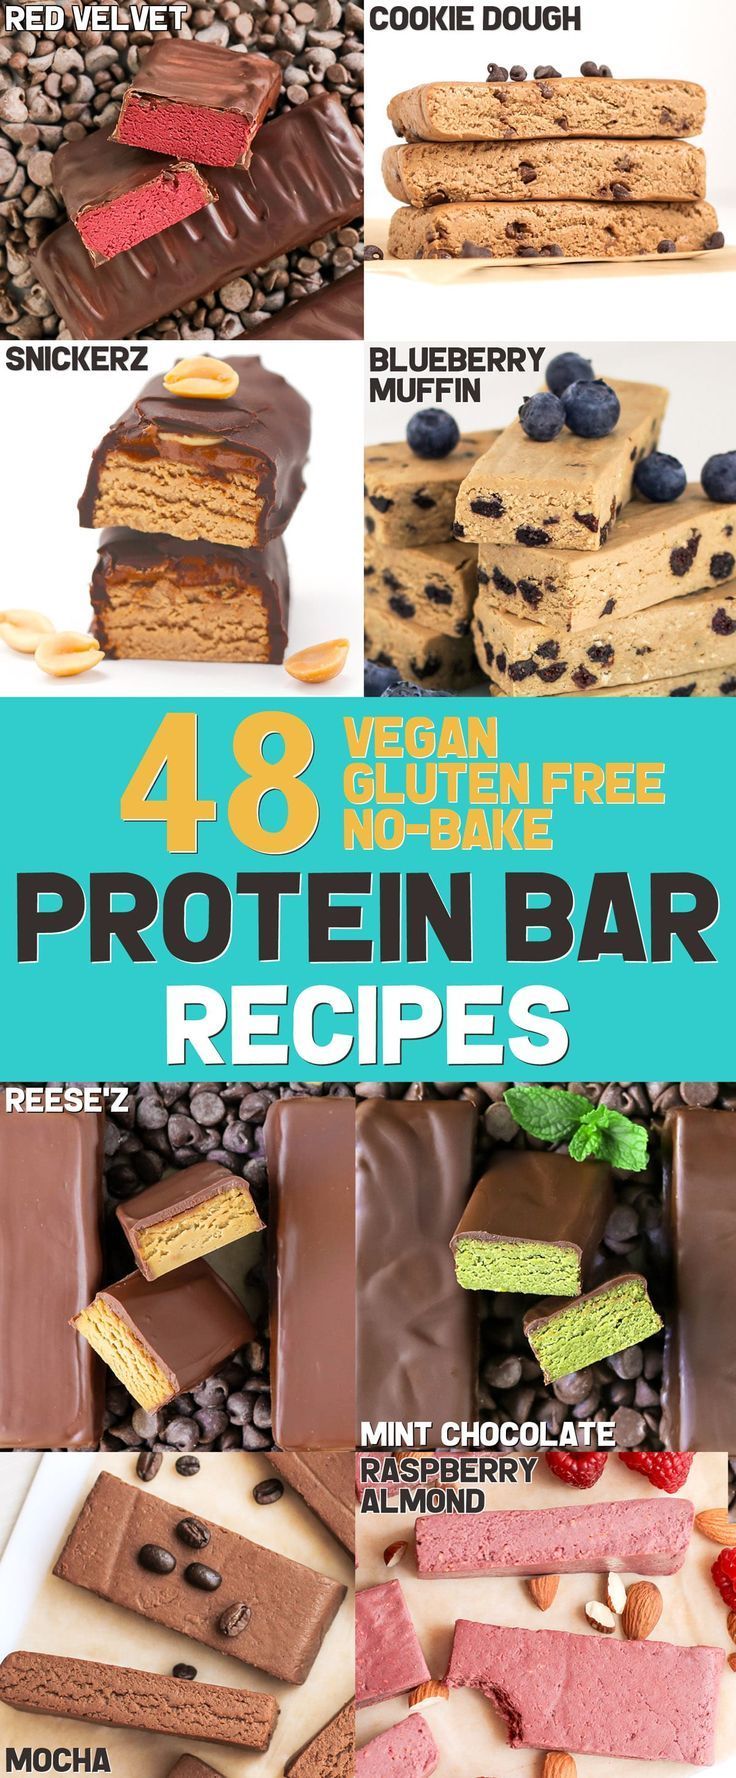 48 Easy No-Bake Protein Bar Recipes in DIY Protein Bars Cookbook! -   8 healthy recipes Baking protein bars ideas